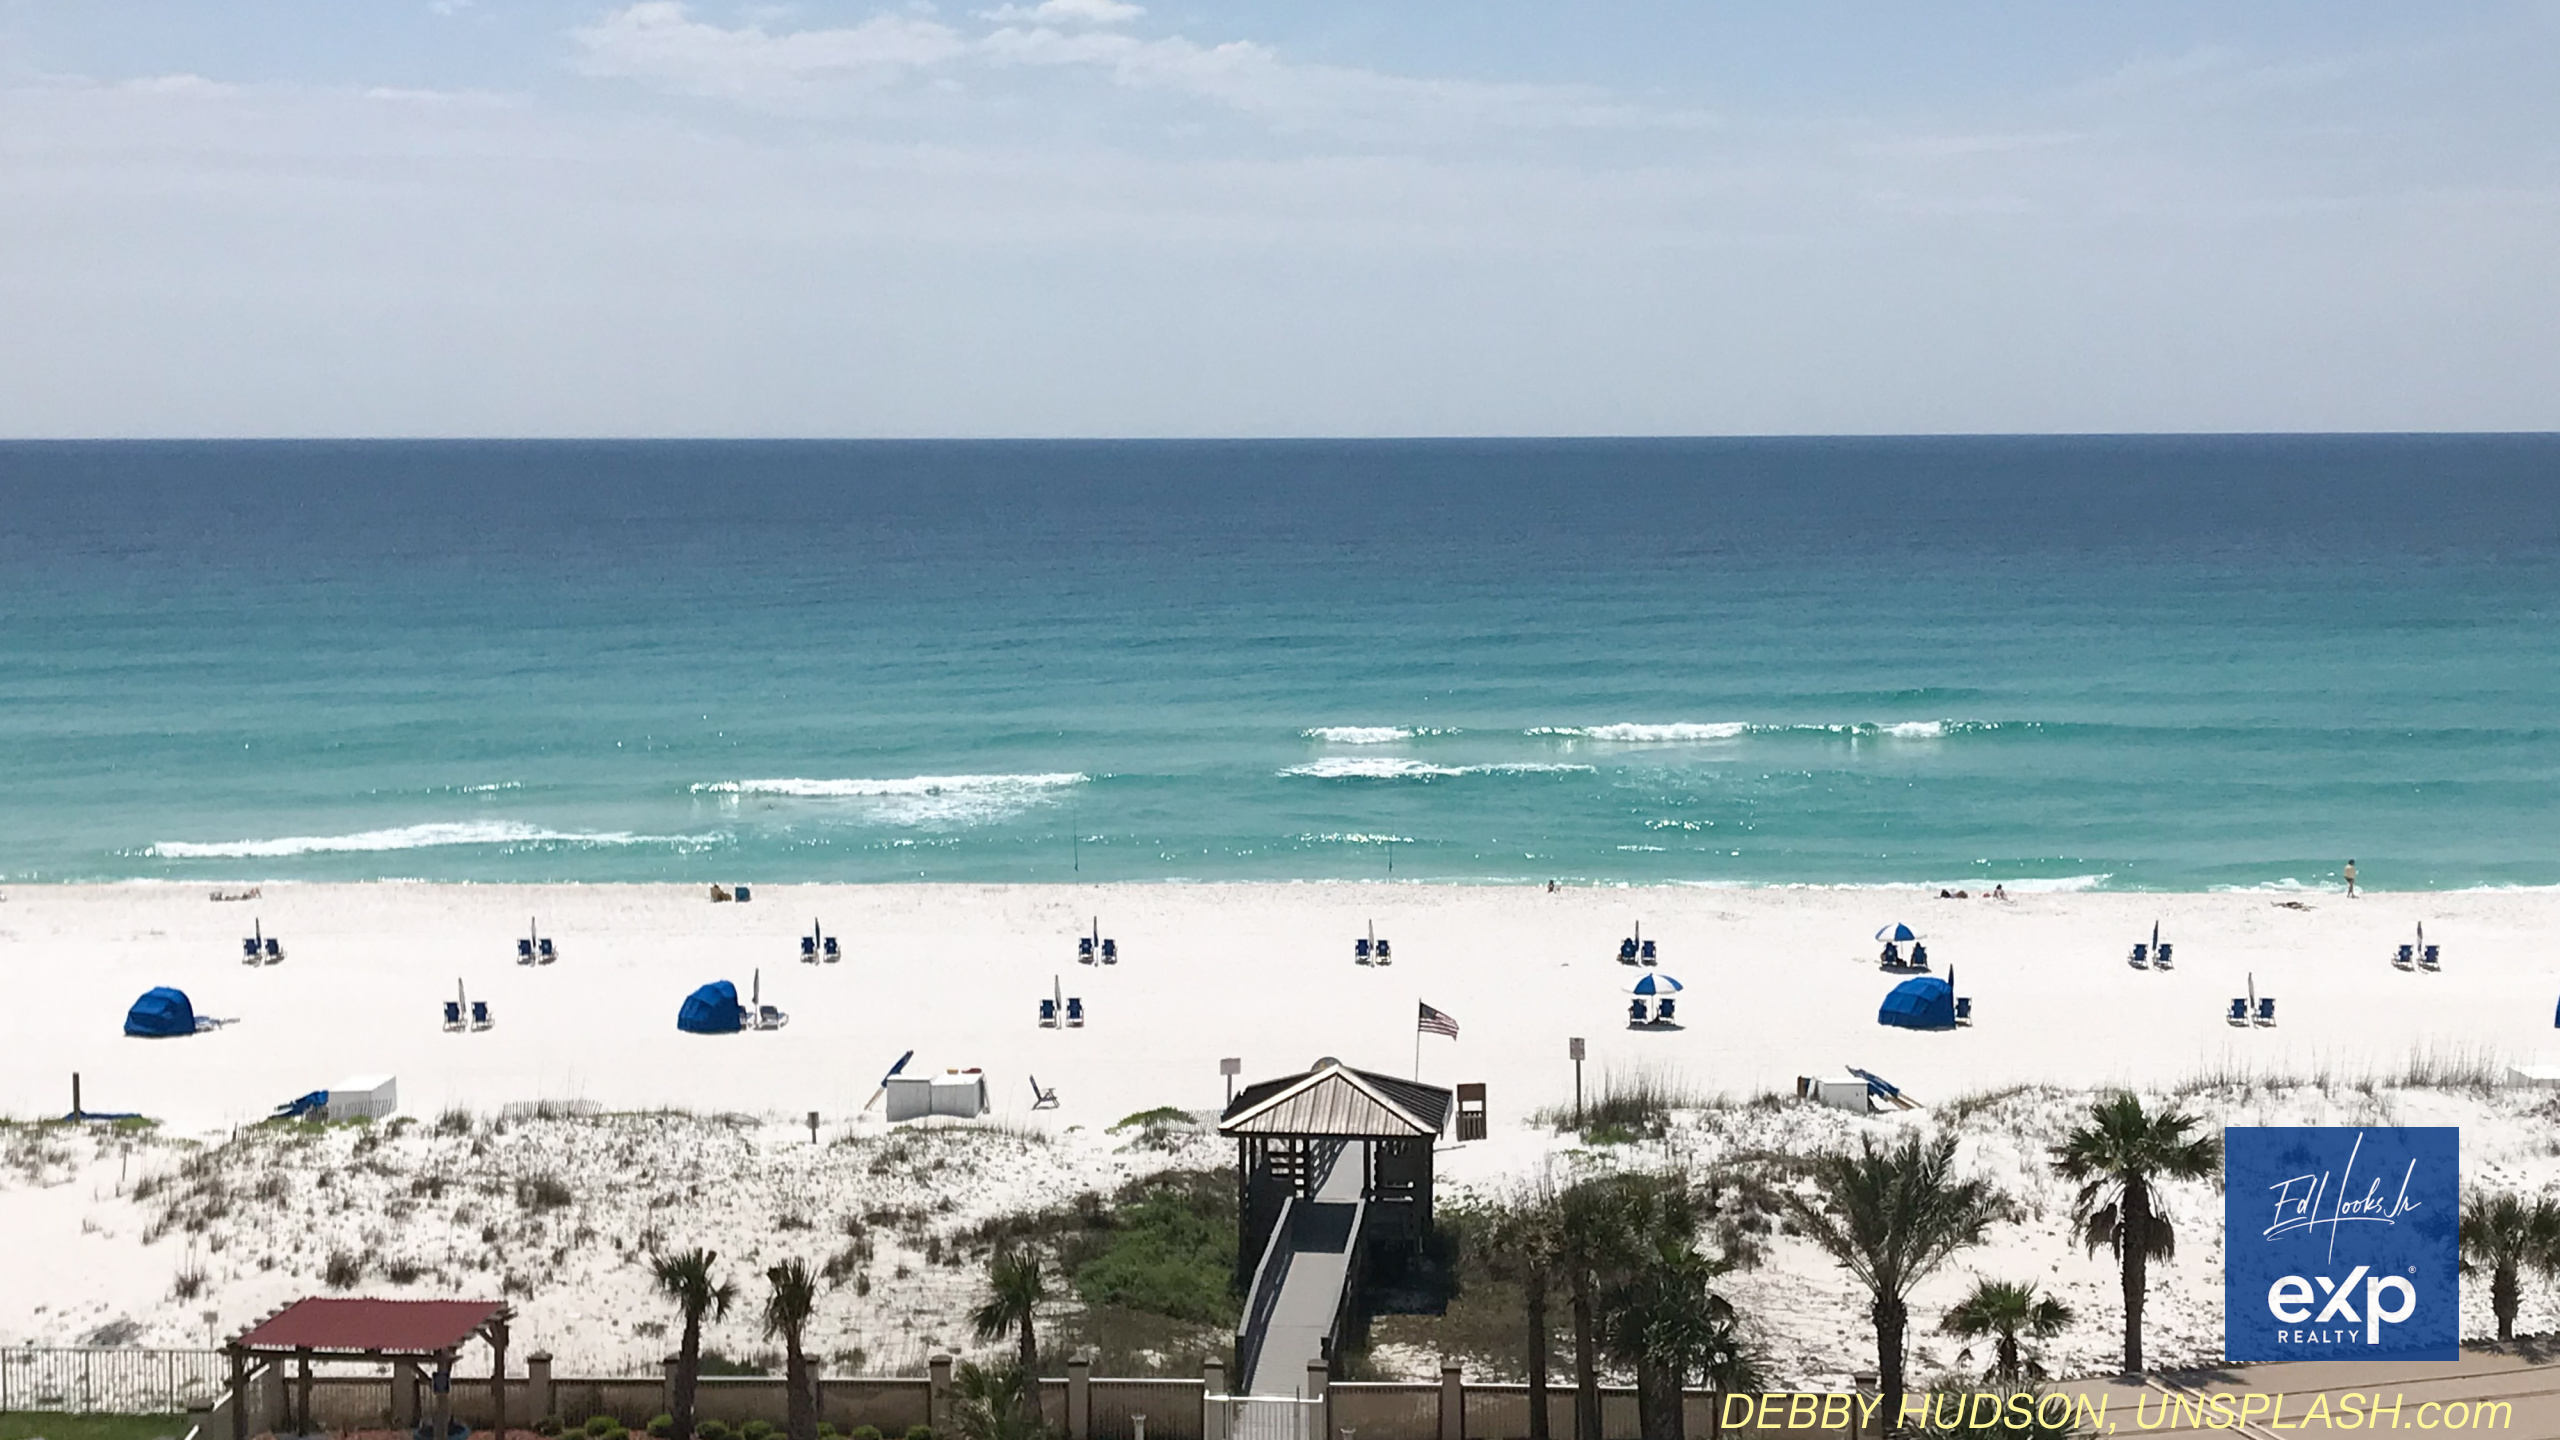 Emerald Coast Beach scene, umbreallas and personal shelters arrayed